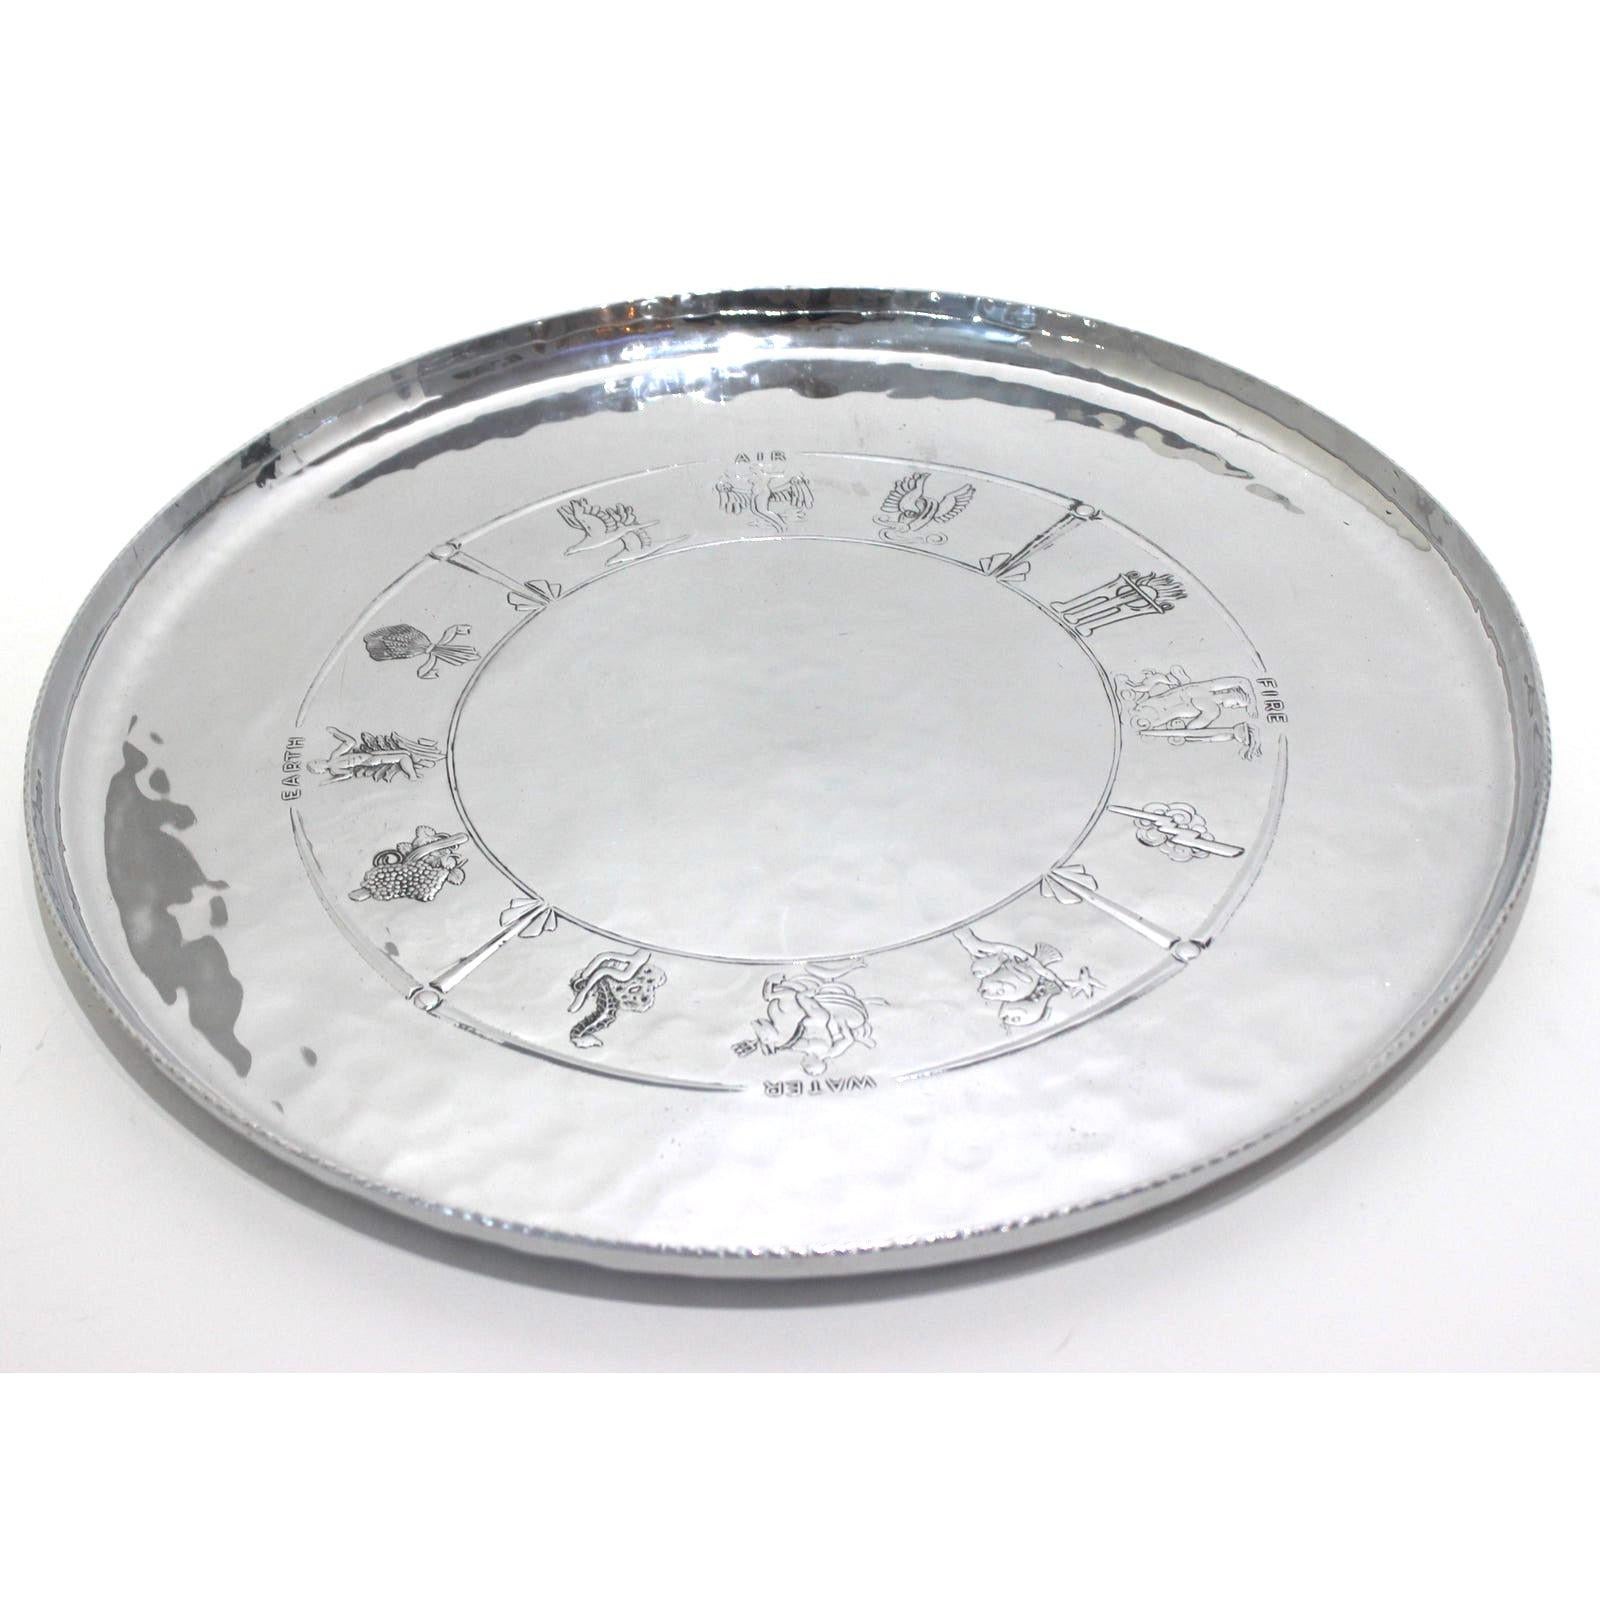 20th Century American Art Deco Aluminum Serving Tray by Everlast Metal